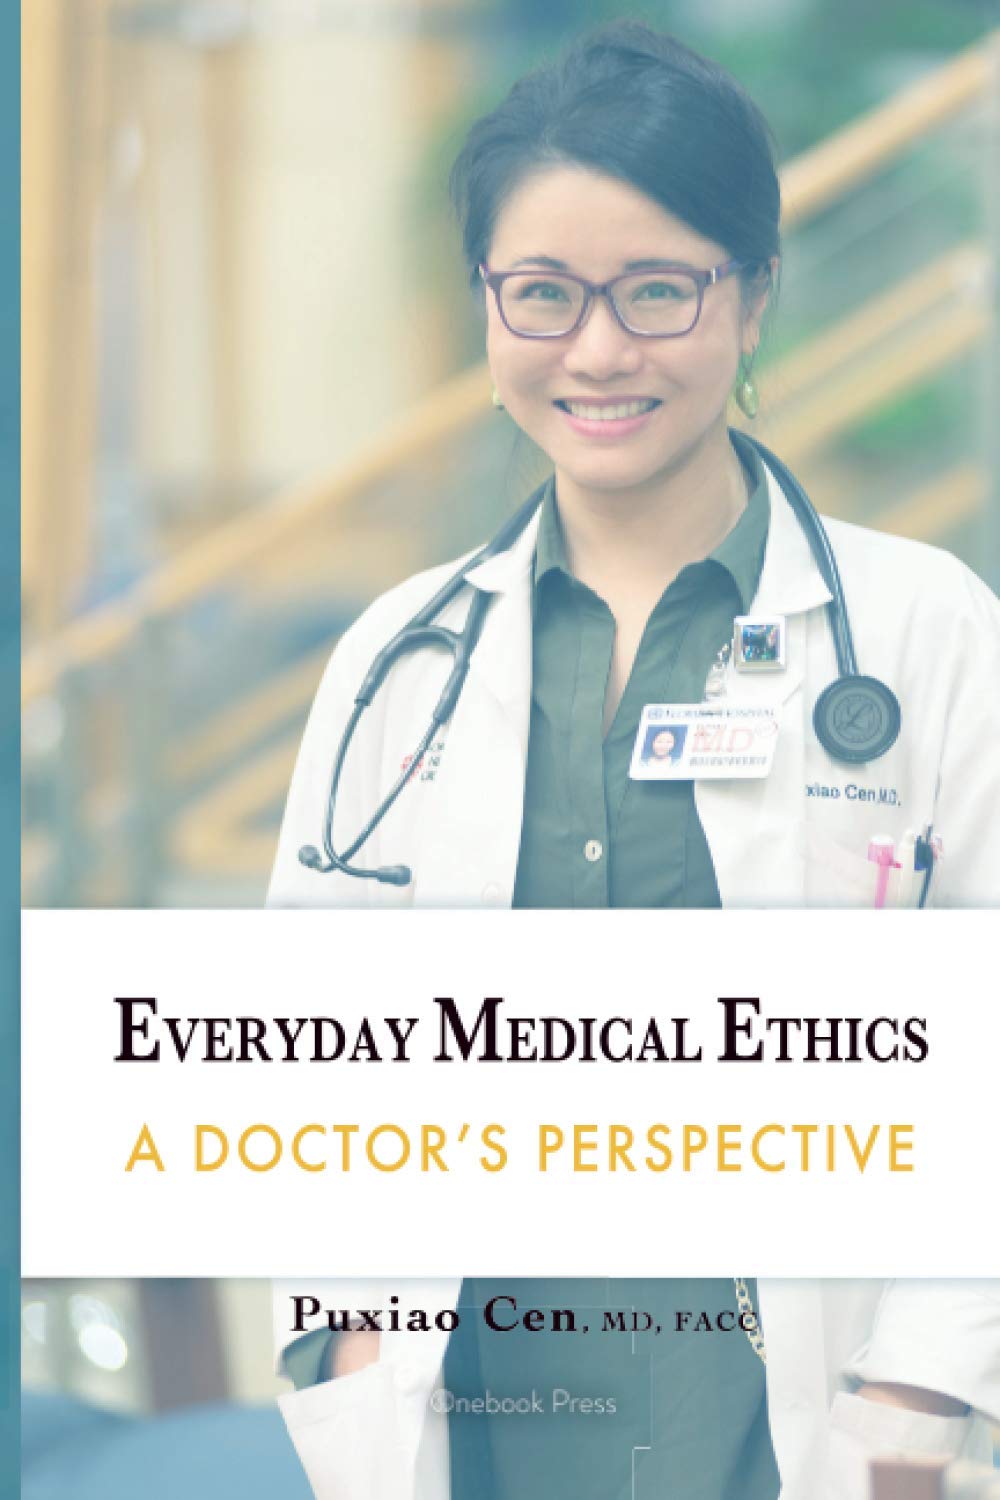 EVERYDAY MEDICAL ETHICS: A Doctor's Perspective